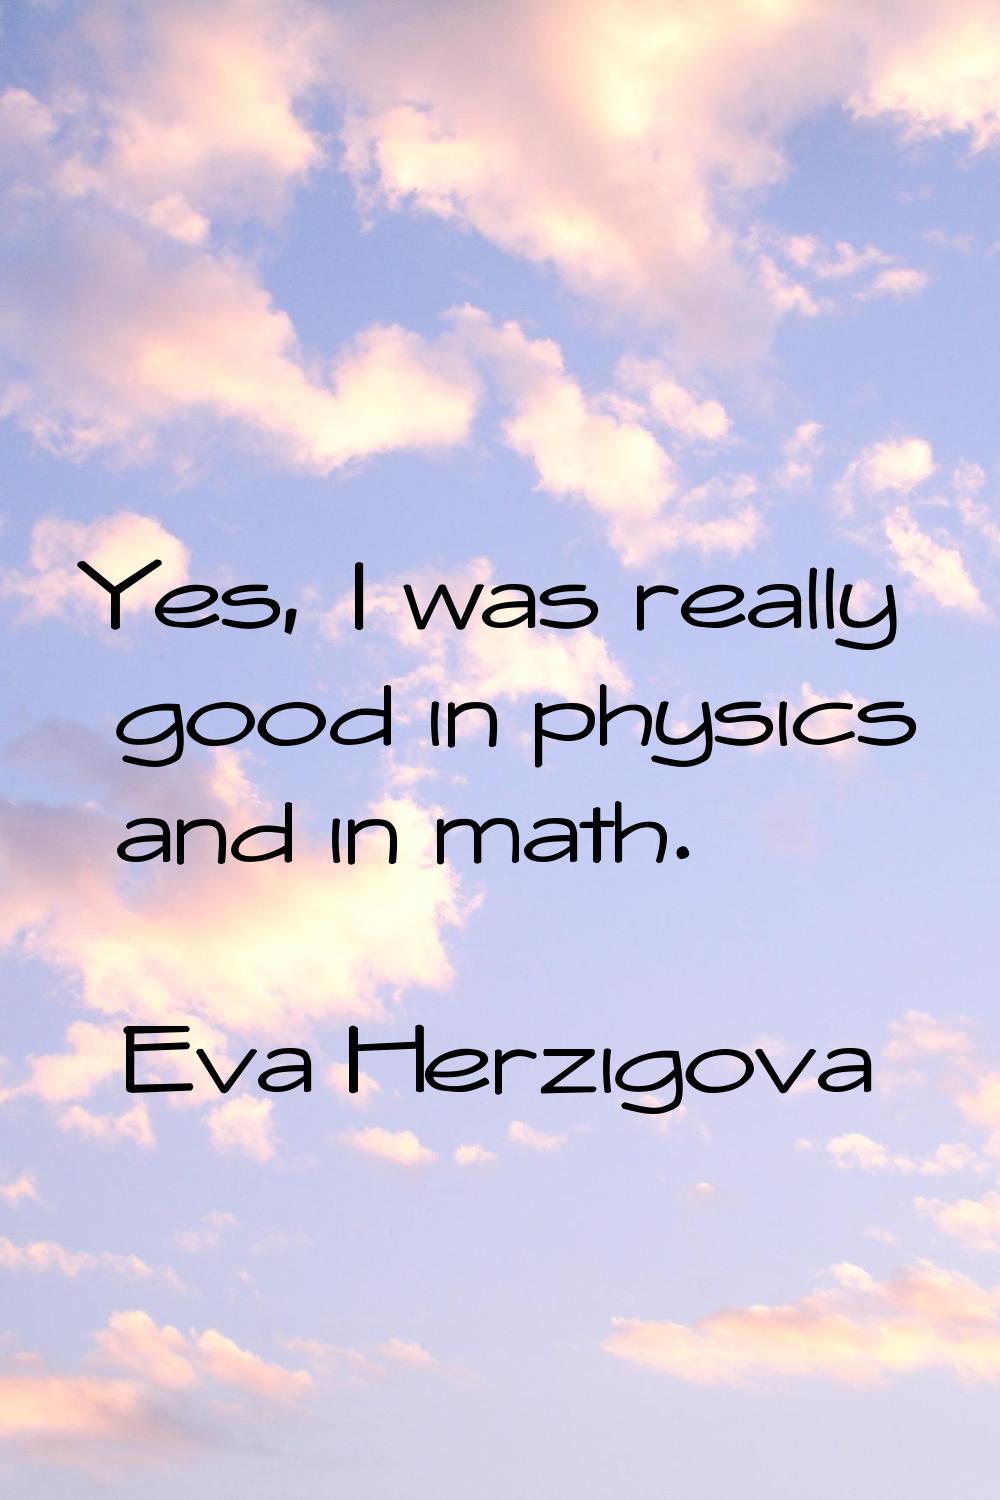 Yes, I was really good in physics and in math.